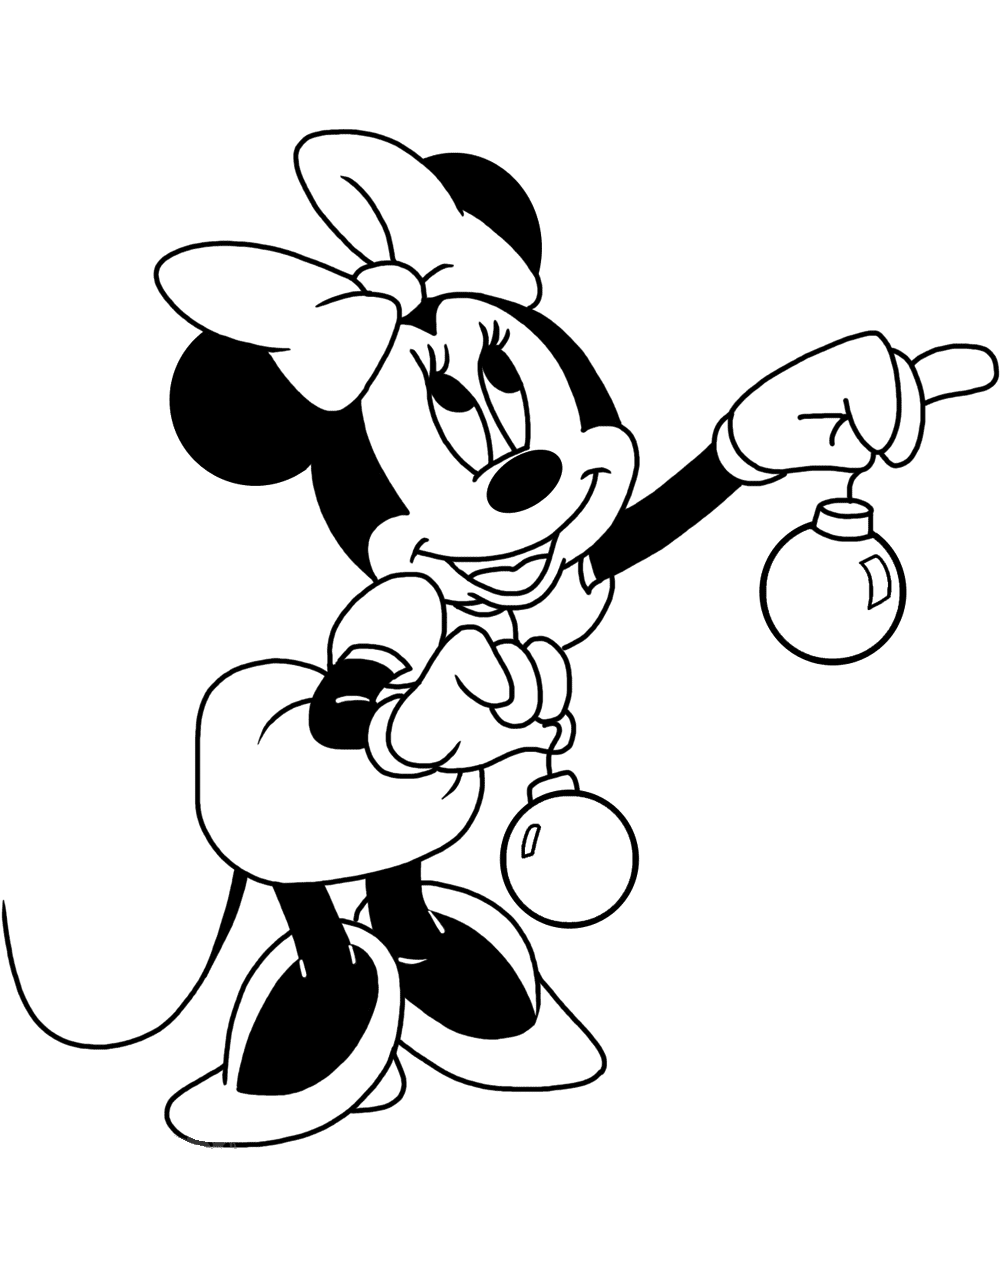 Download Mickey Mouse Christmas Coloring Pages - Best Coloring Pages For Kids